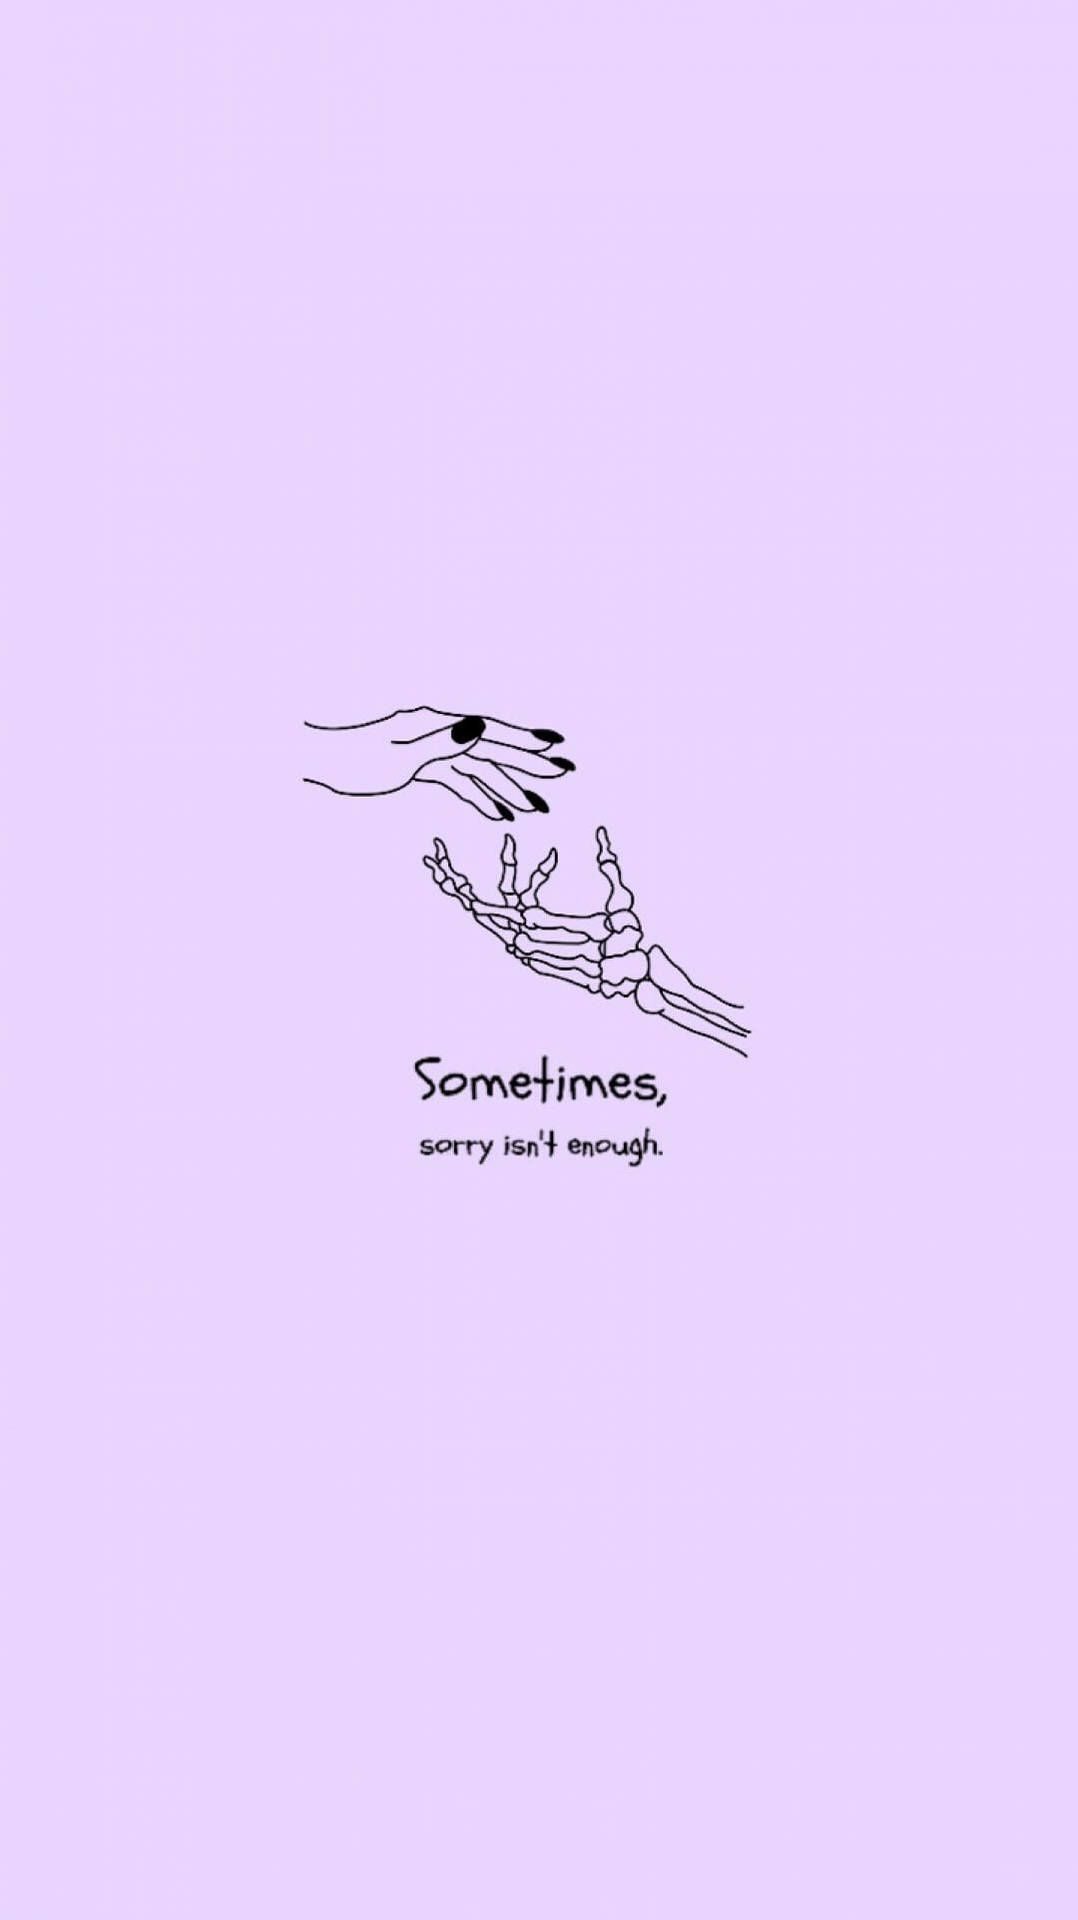 Sometimes sorry isn't enough skeleton hands holding hands purple background phone wallpaper - Pastel purple, hand drawn